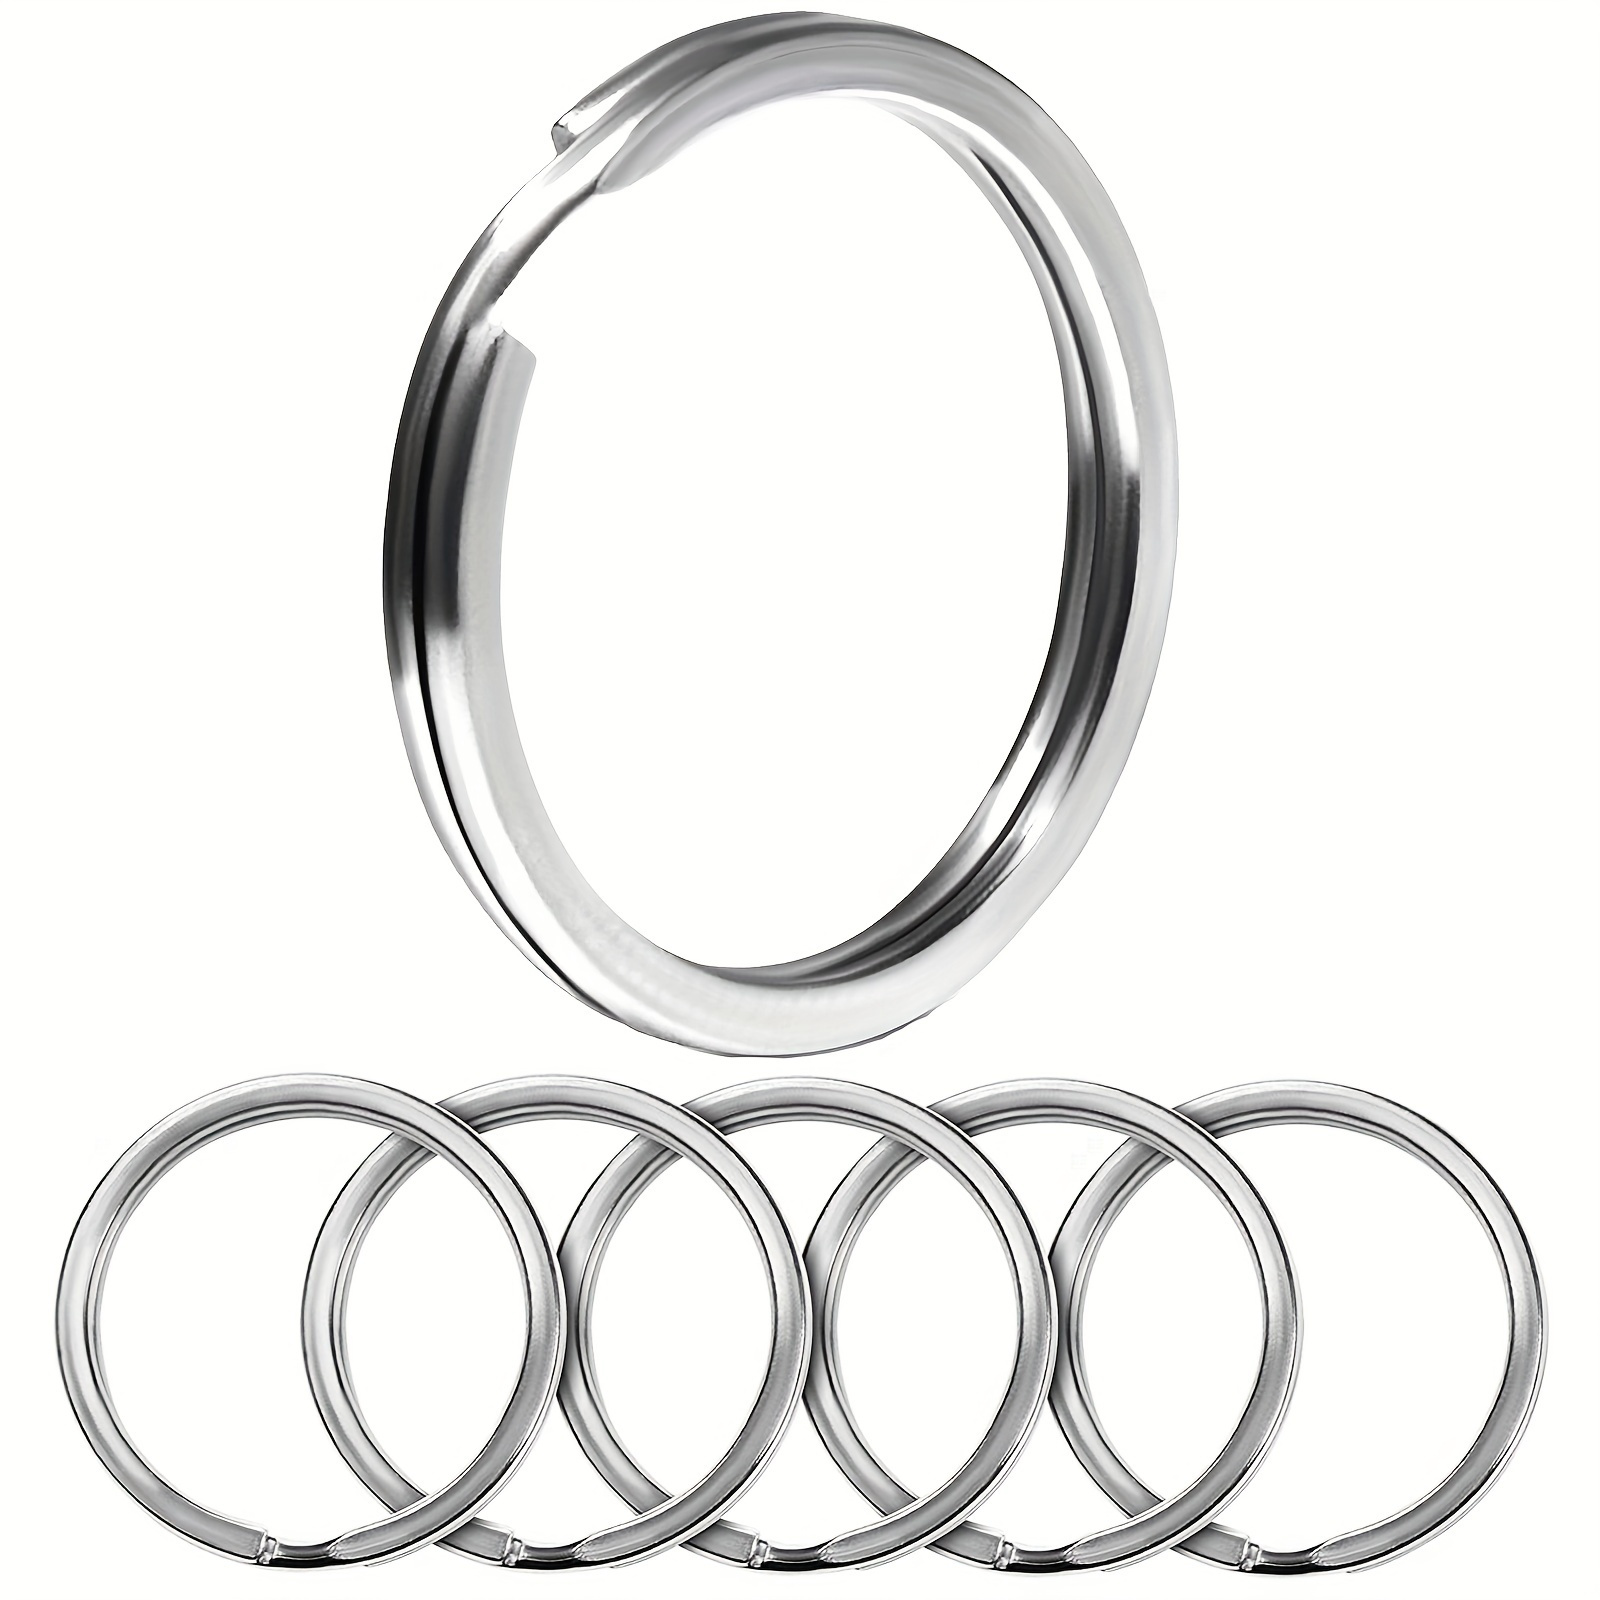 5-50pcs 304 Stainless Steel Key Ring Key Chain Keyrings Keychain Key Holder  Split Ring for Jewelry Making (Color : Steel, Size : 30mm 20pcs)